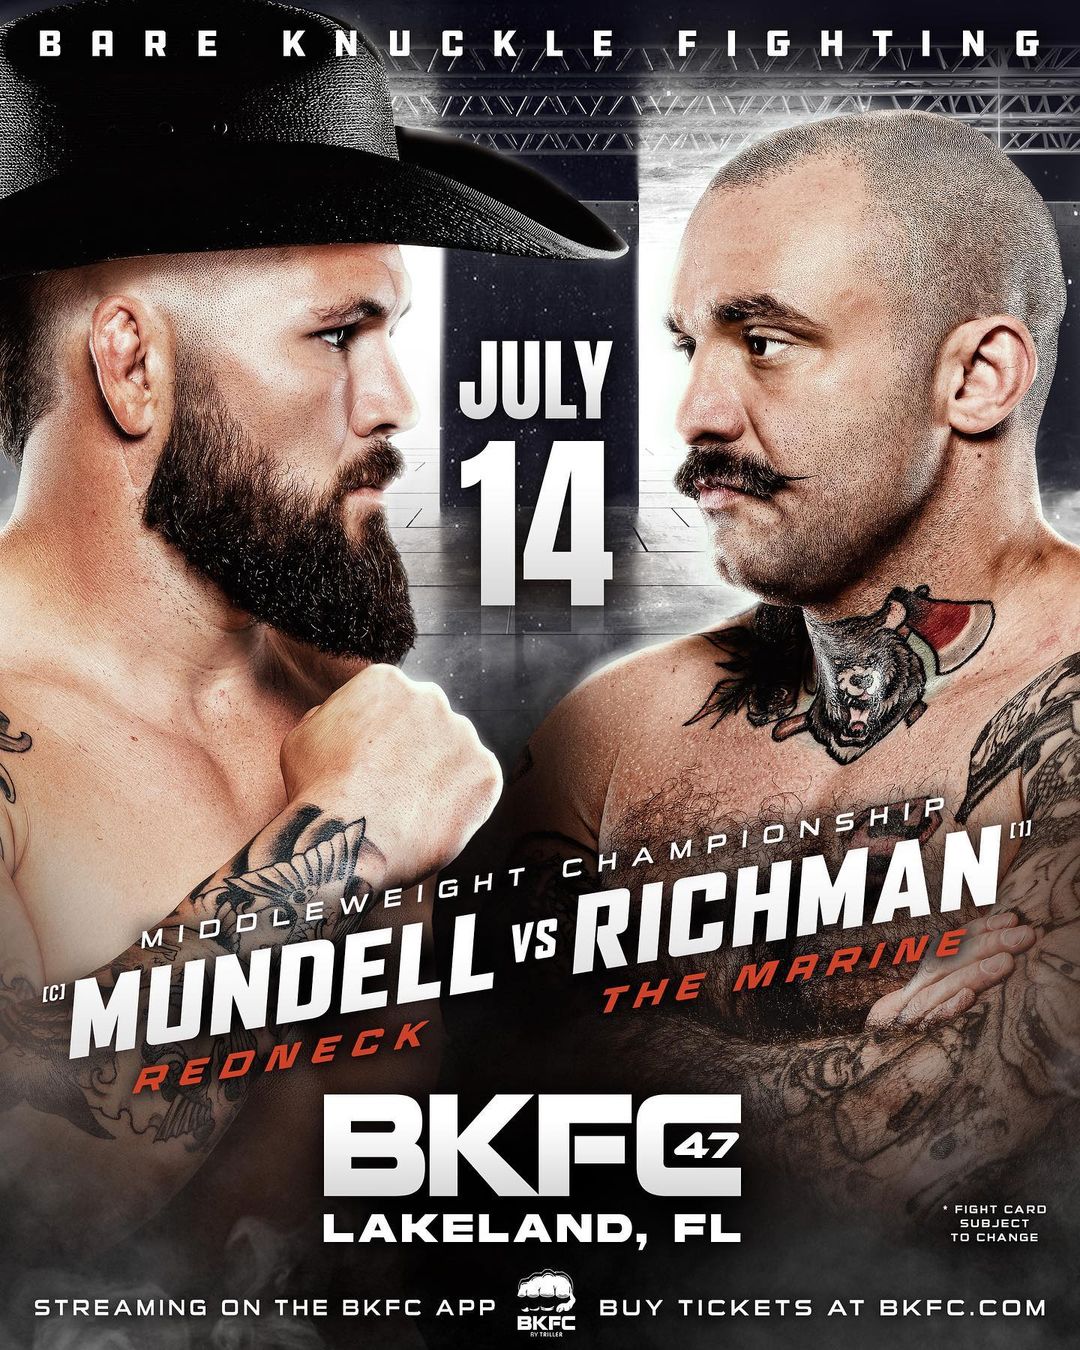 Bare Knuckle FC 47